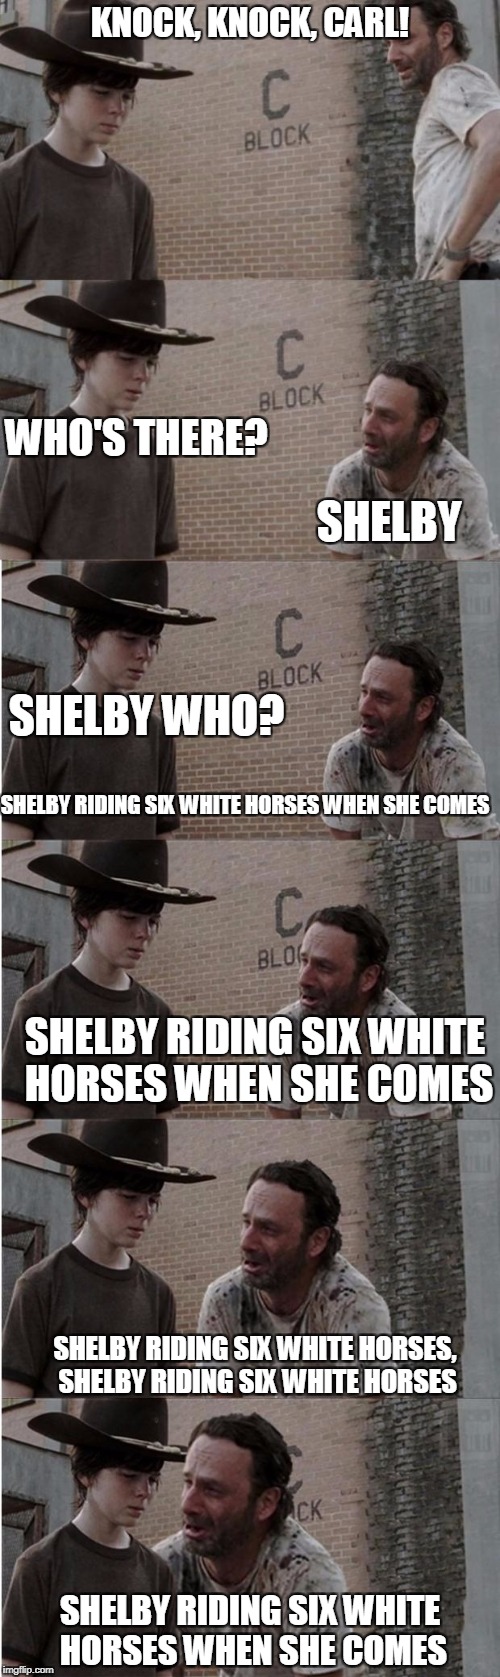 Rick and Carl Longer | KNOCK, KNOCK, CARL! WHO'S THERE? SHELBY; SHELBY WHO? SHELBY RIDING SIX WHITE HORSES WHEN SHE COMES; SHELBY RIDING SIX WHITE HORSES WHEN SHE COMES; SHELBY RIDING SIX WHITE HORSES, SHELBY RIDING SIX WHITE HORSES; SHELBY RIDING SIX WHITE HORSES WHEN SHE COMES | image tagged in memes,rick and carl longer | made w/ Imgflip meme maker